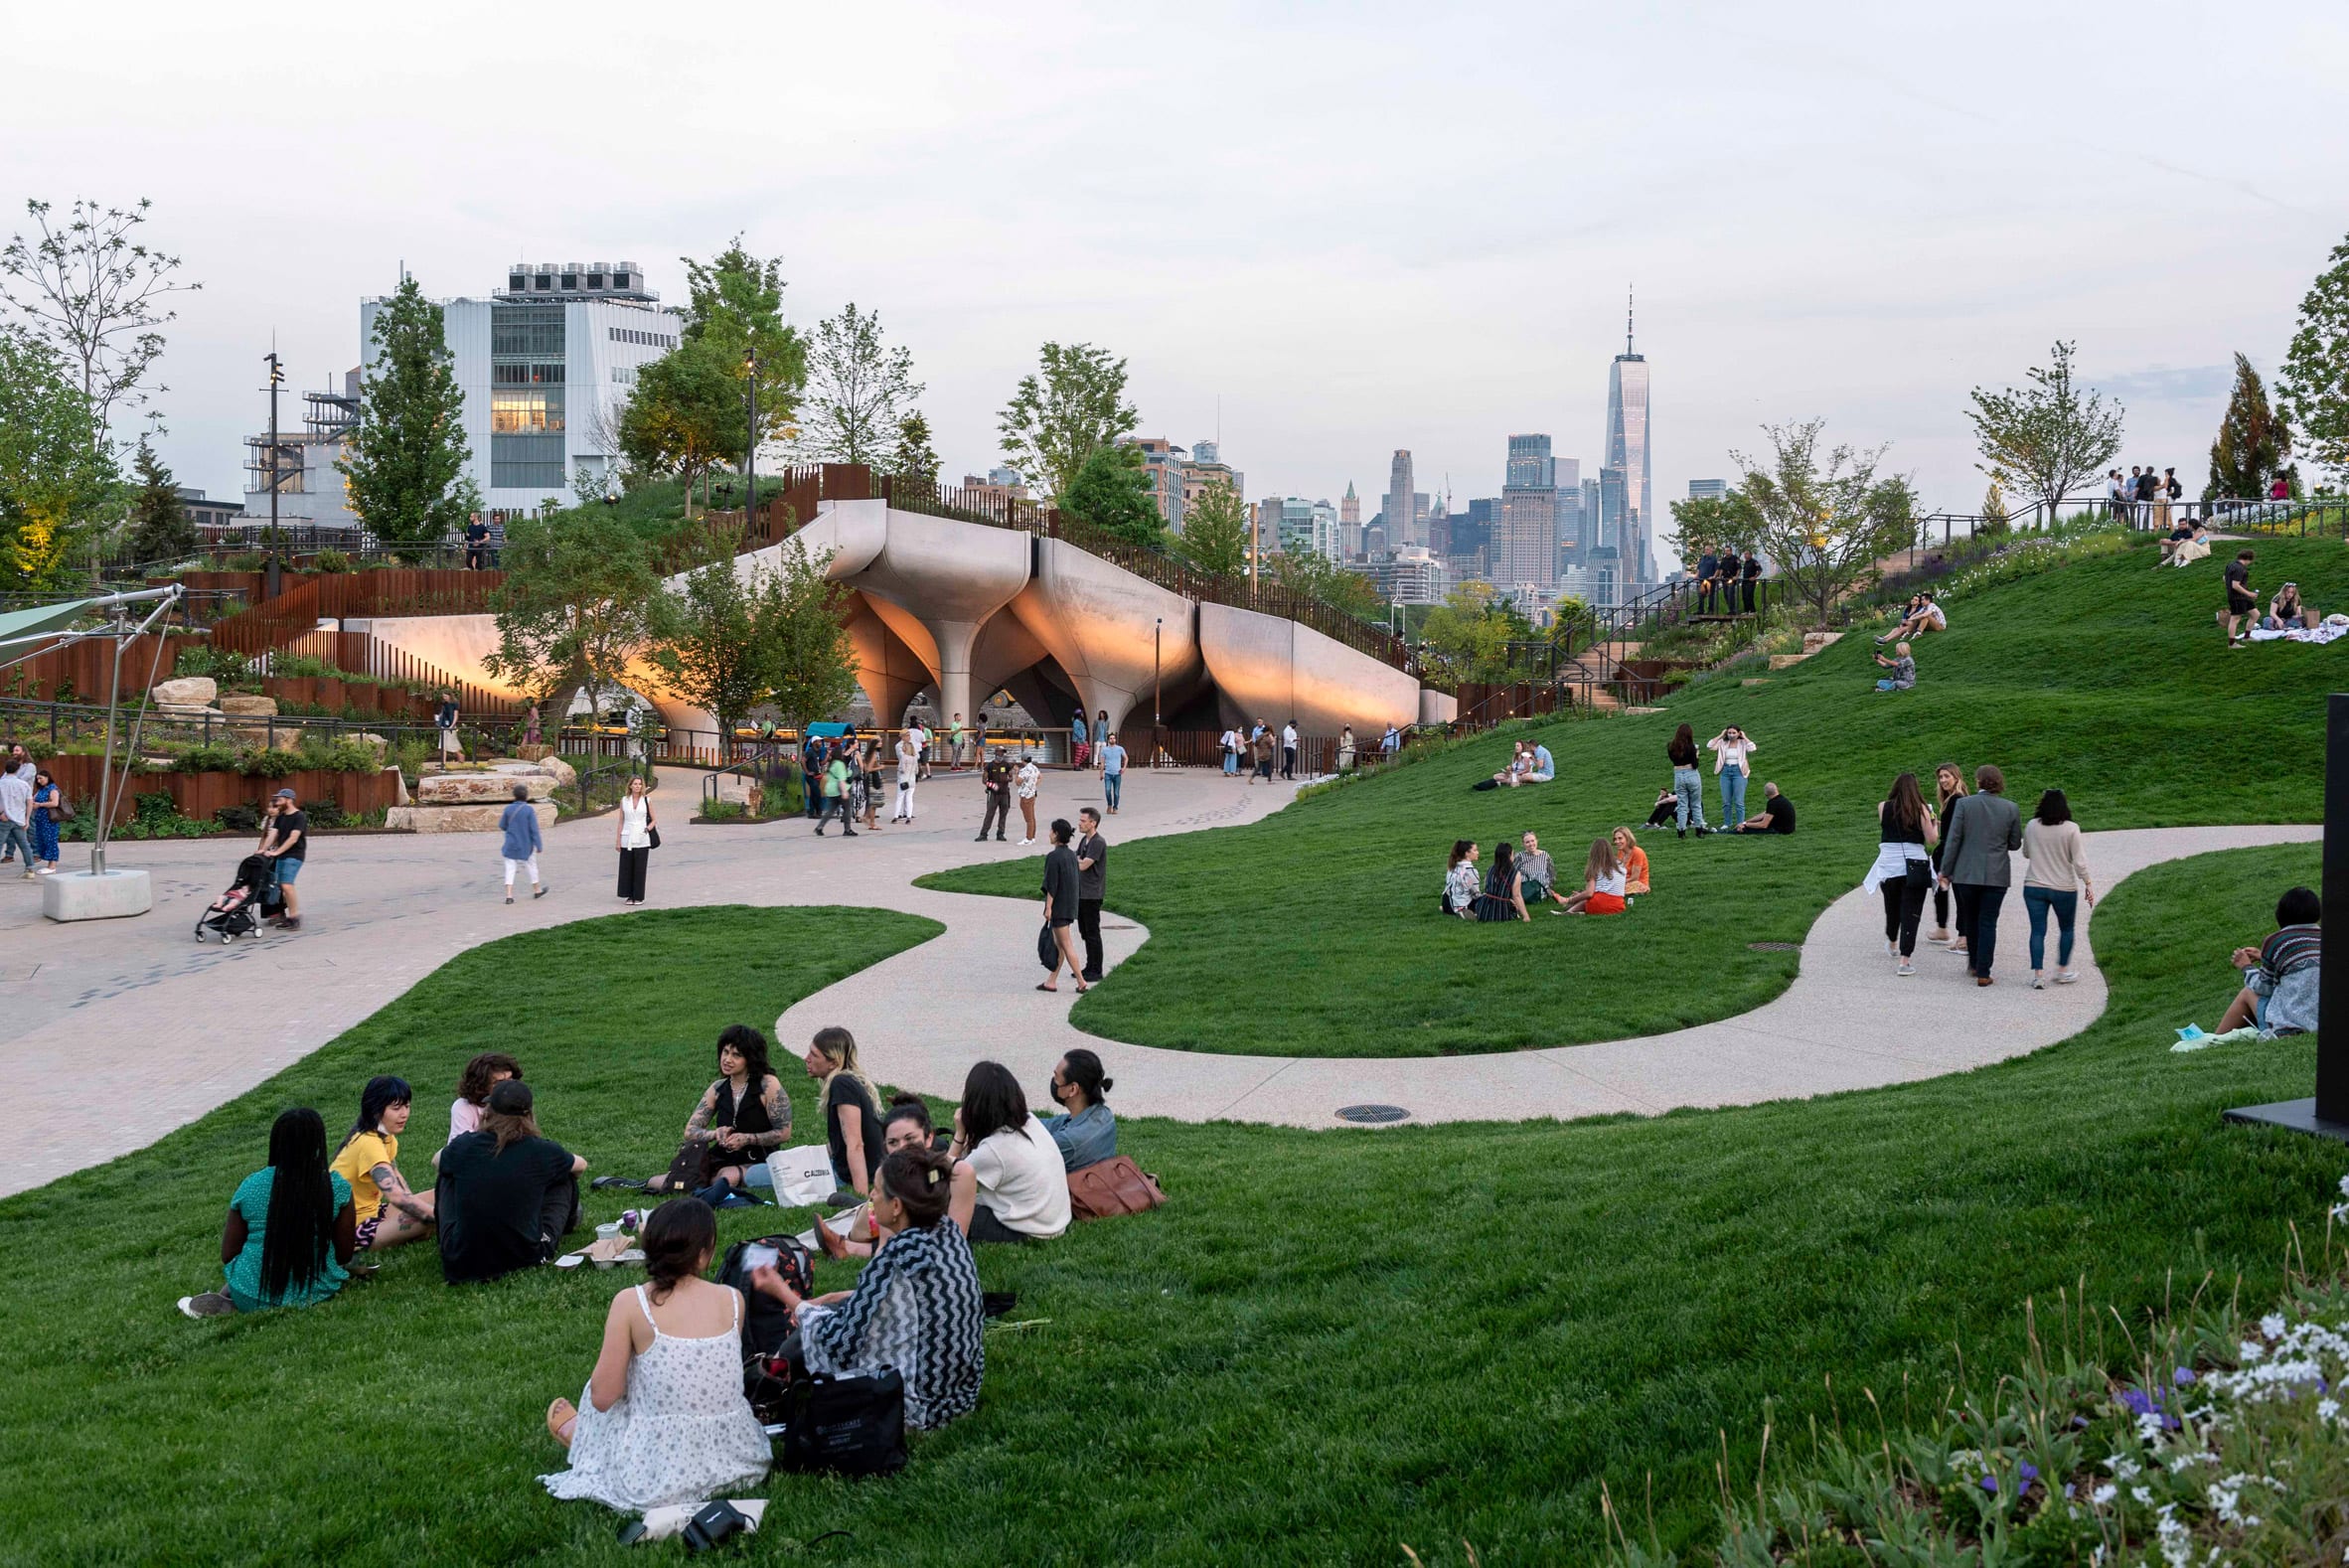 People on the grass of a new park in New York